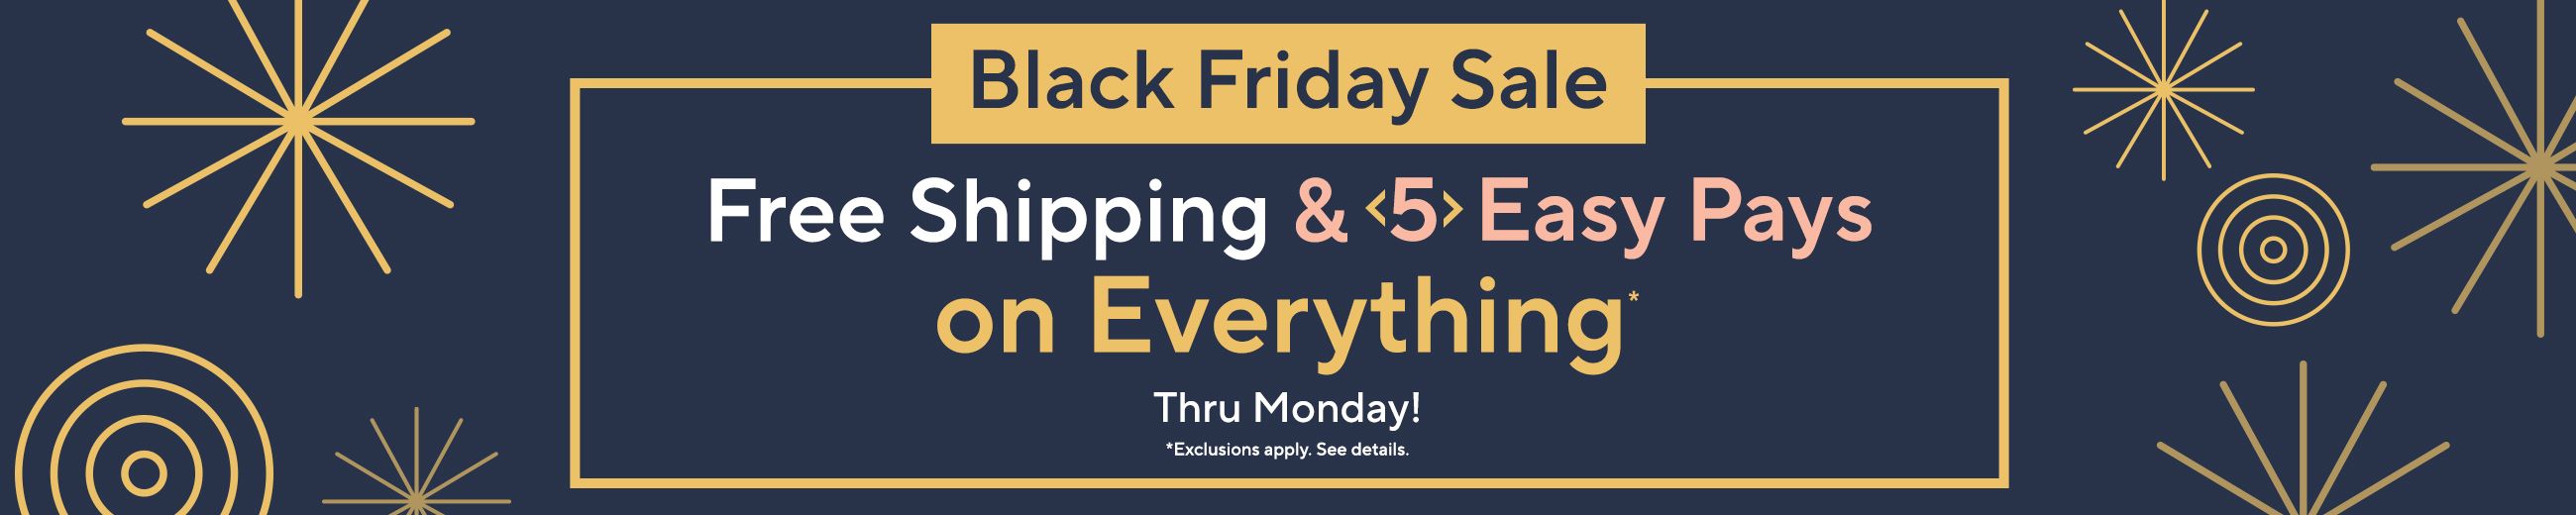 Free Shipping & 5 Easy Pays on Everything* Thru Sunday! Get shopping.   *Exclusions apply. See Details 